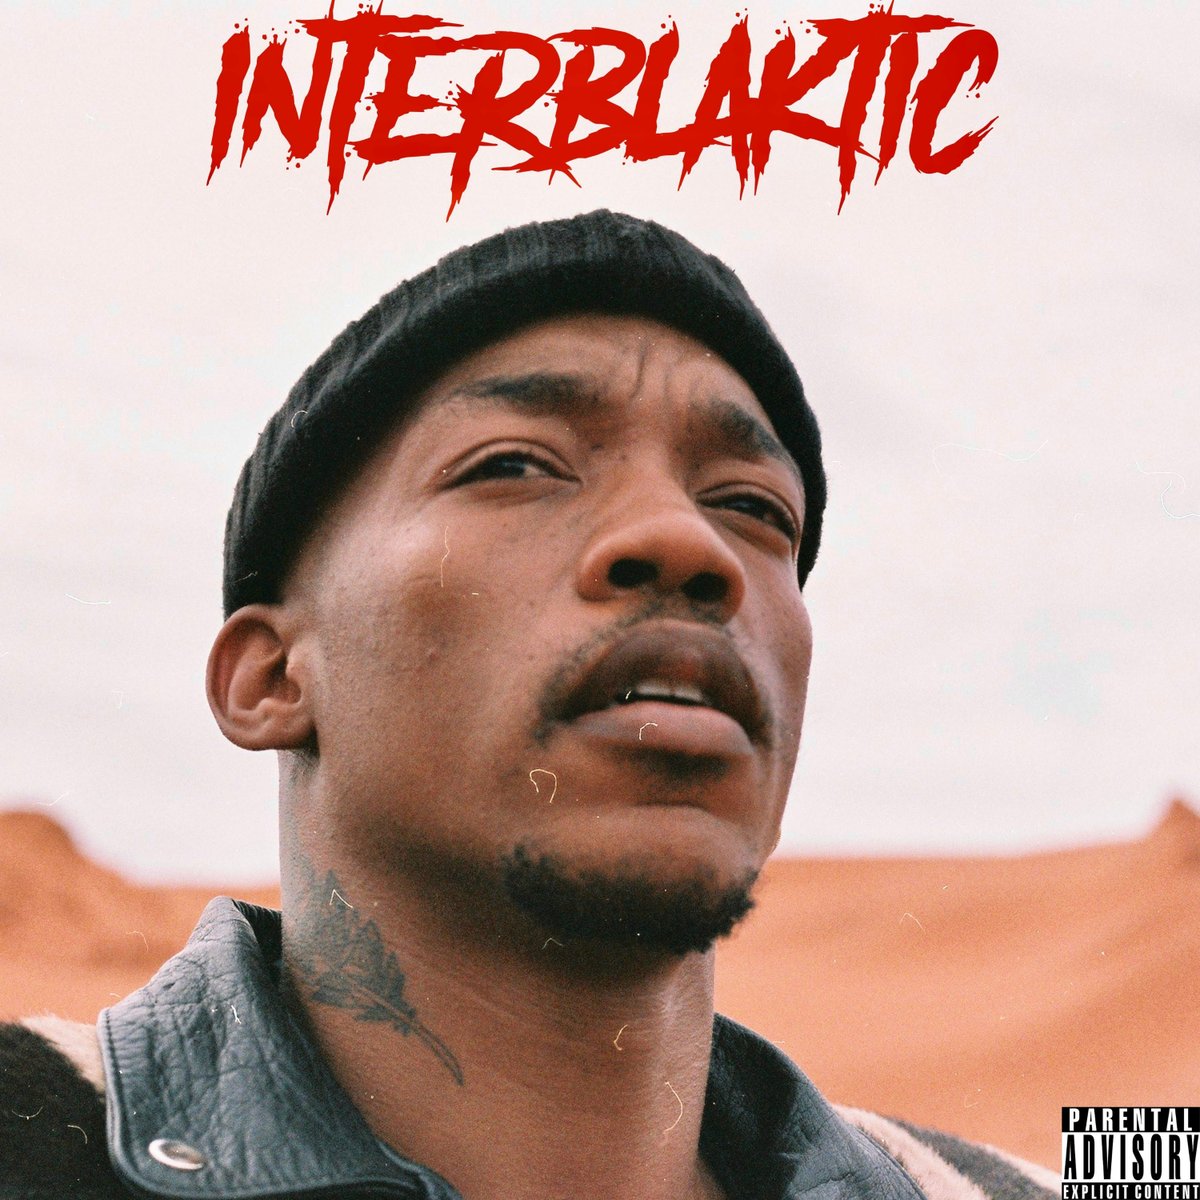 The Zulu Skywalker @muziou drops his new project today #Interblaktic featuring some hot collabs 🔥 Check it out 👉 dzr.fm/Interblaktic 🎧